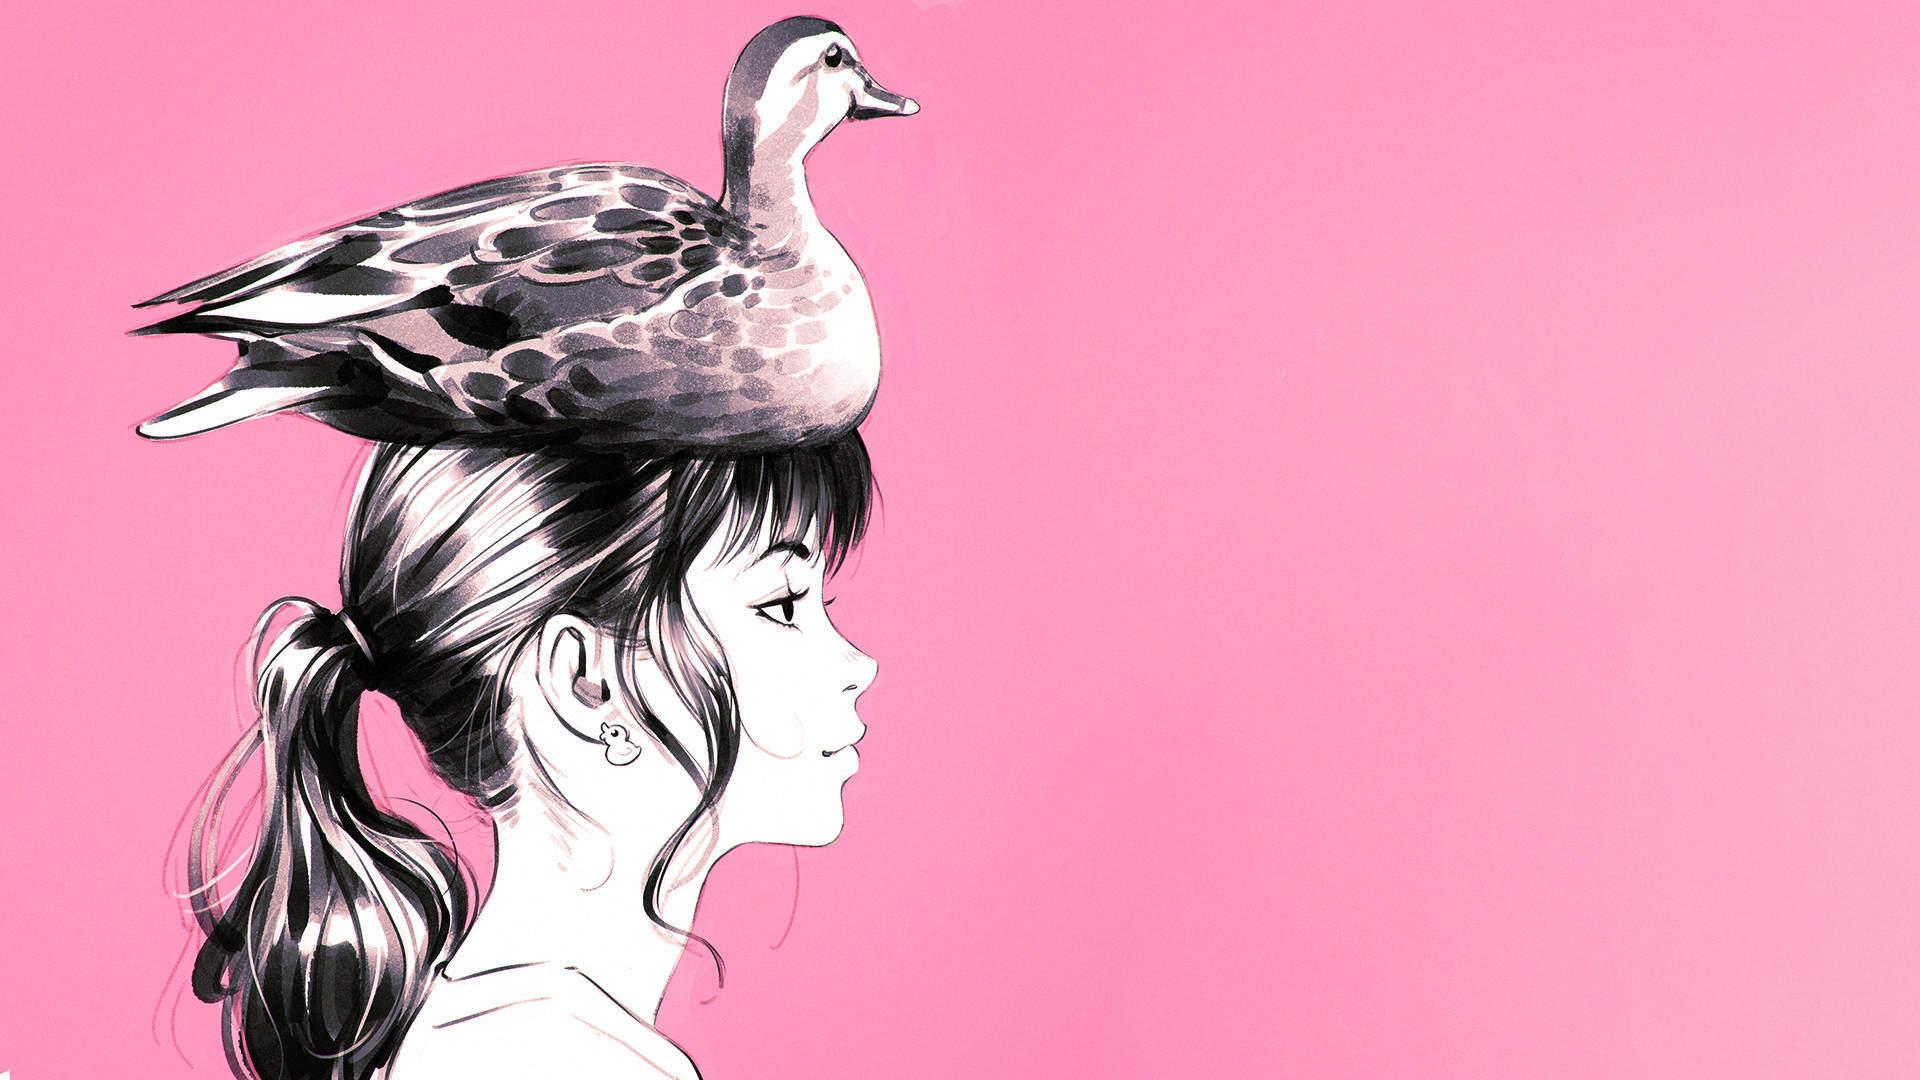 Duck Lady Art In Pink Background